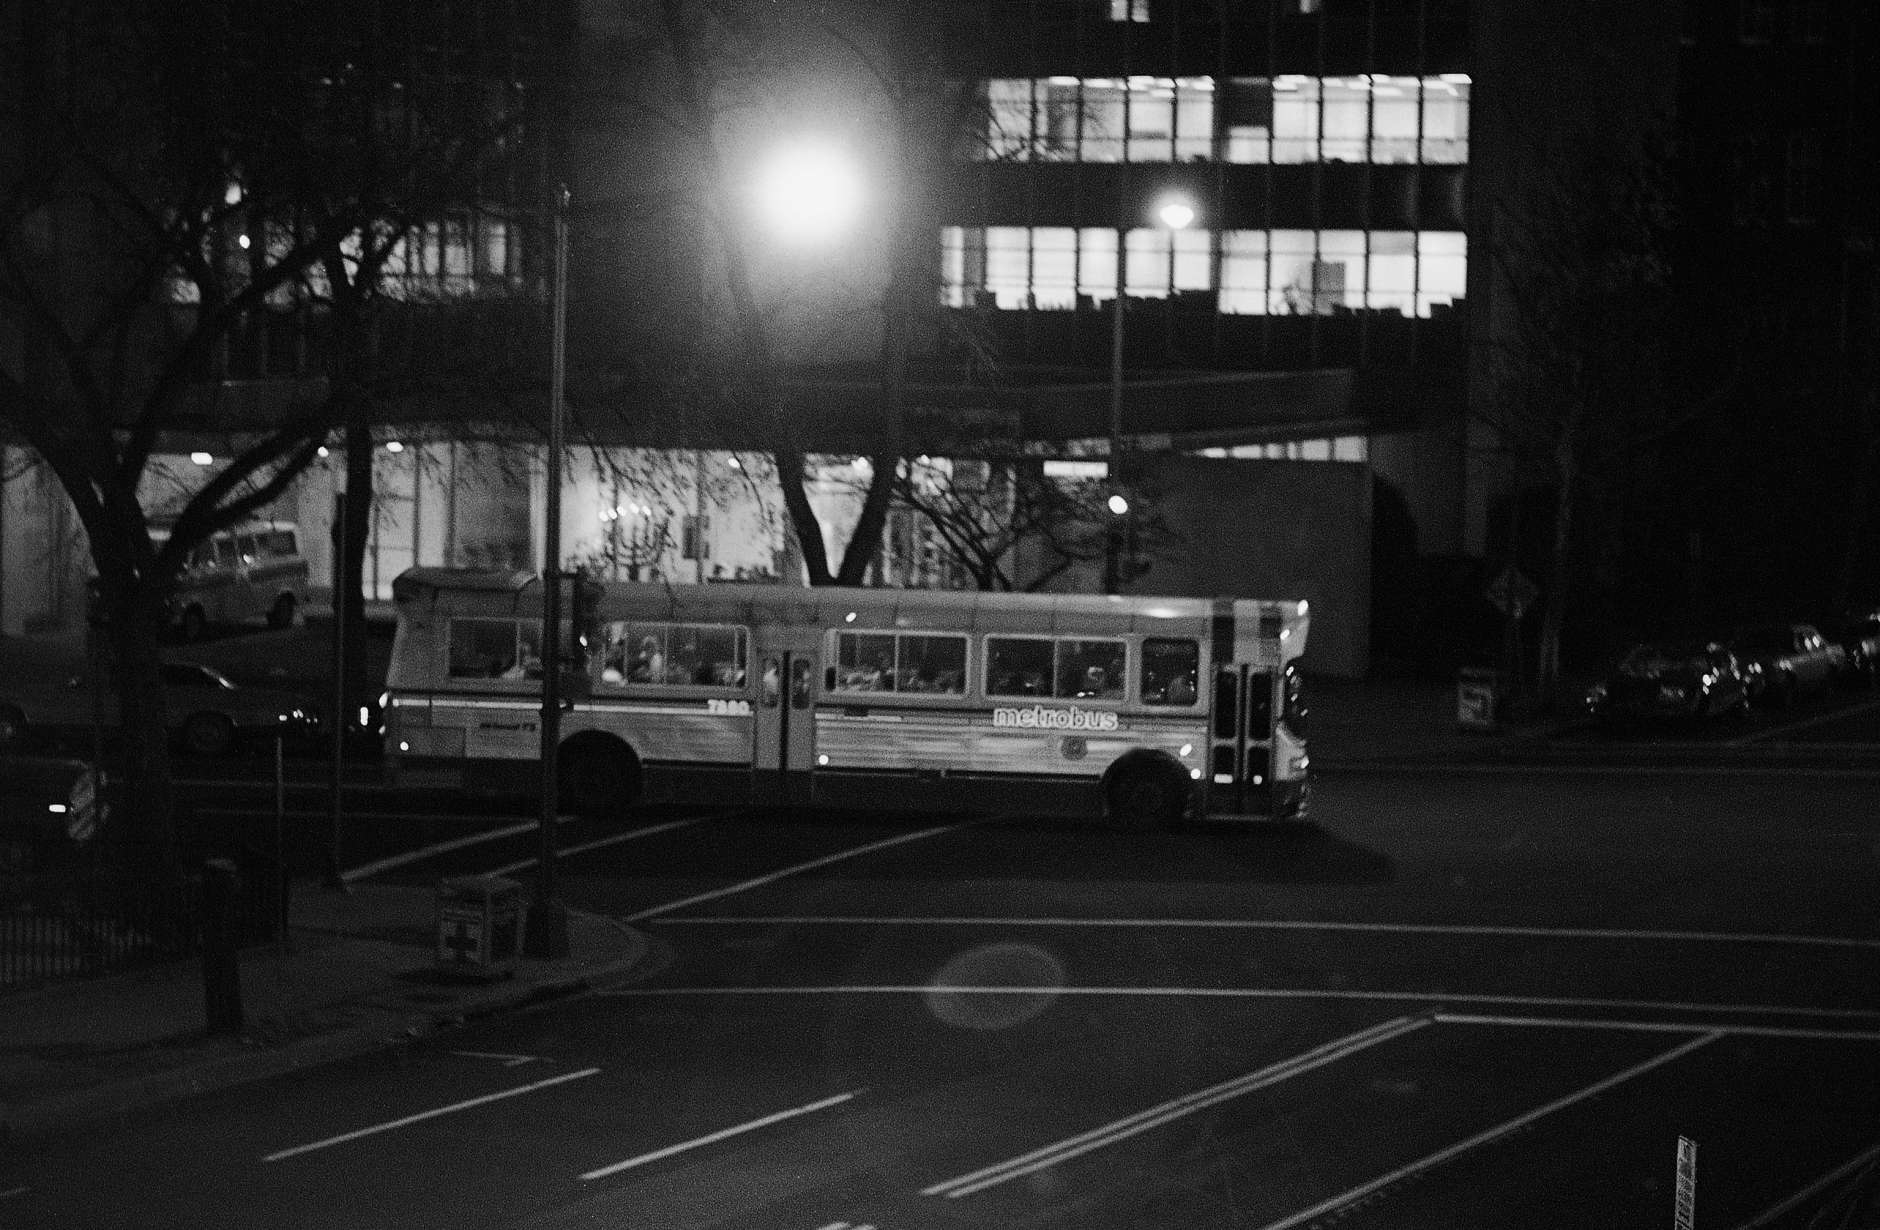 A bus load of hostages leave the Bnai Brith International headquarters, background, following their release by gunmen, Friday, March 11, 1977, Washington, D.C. (AP Photo)